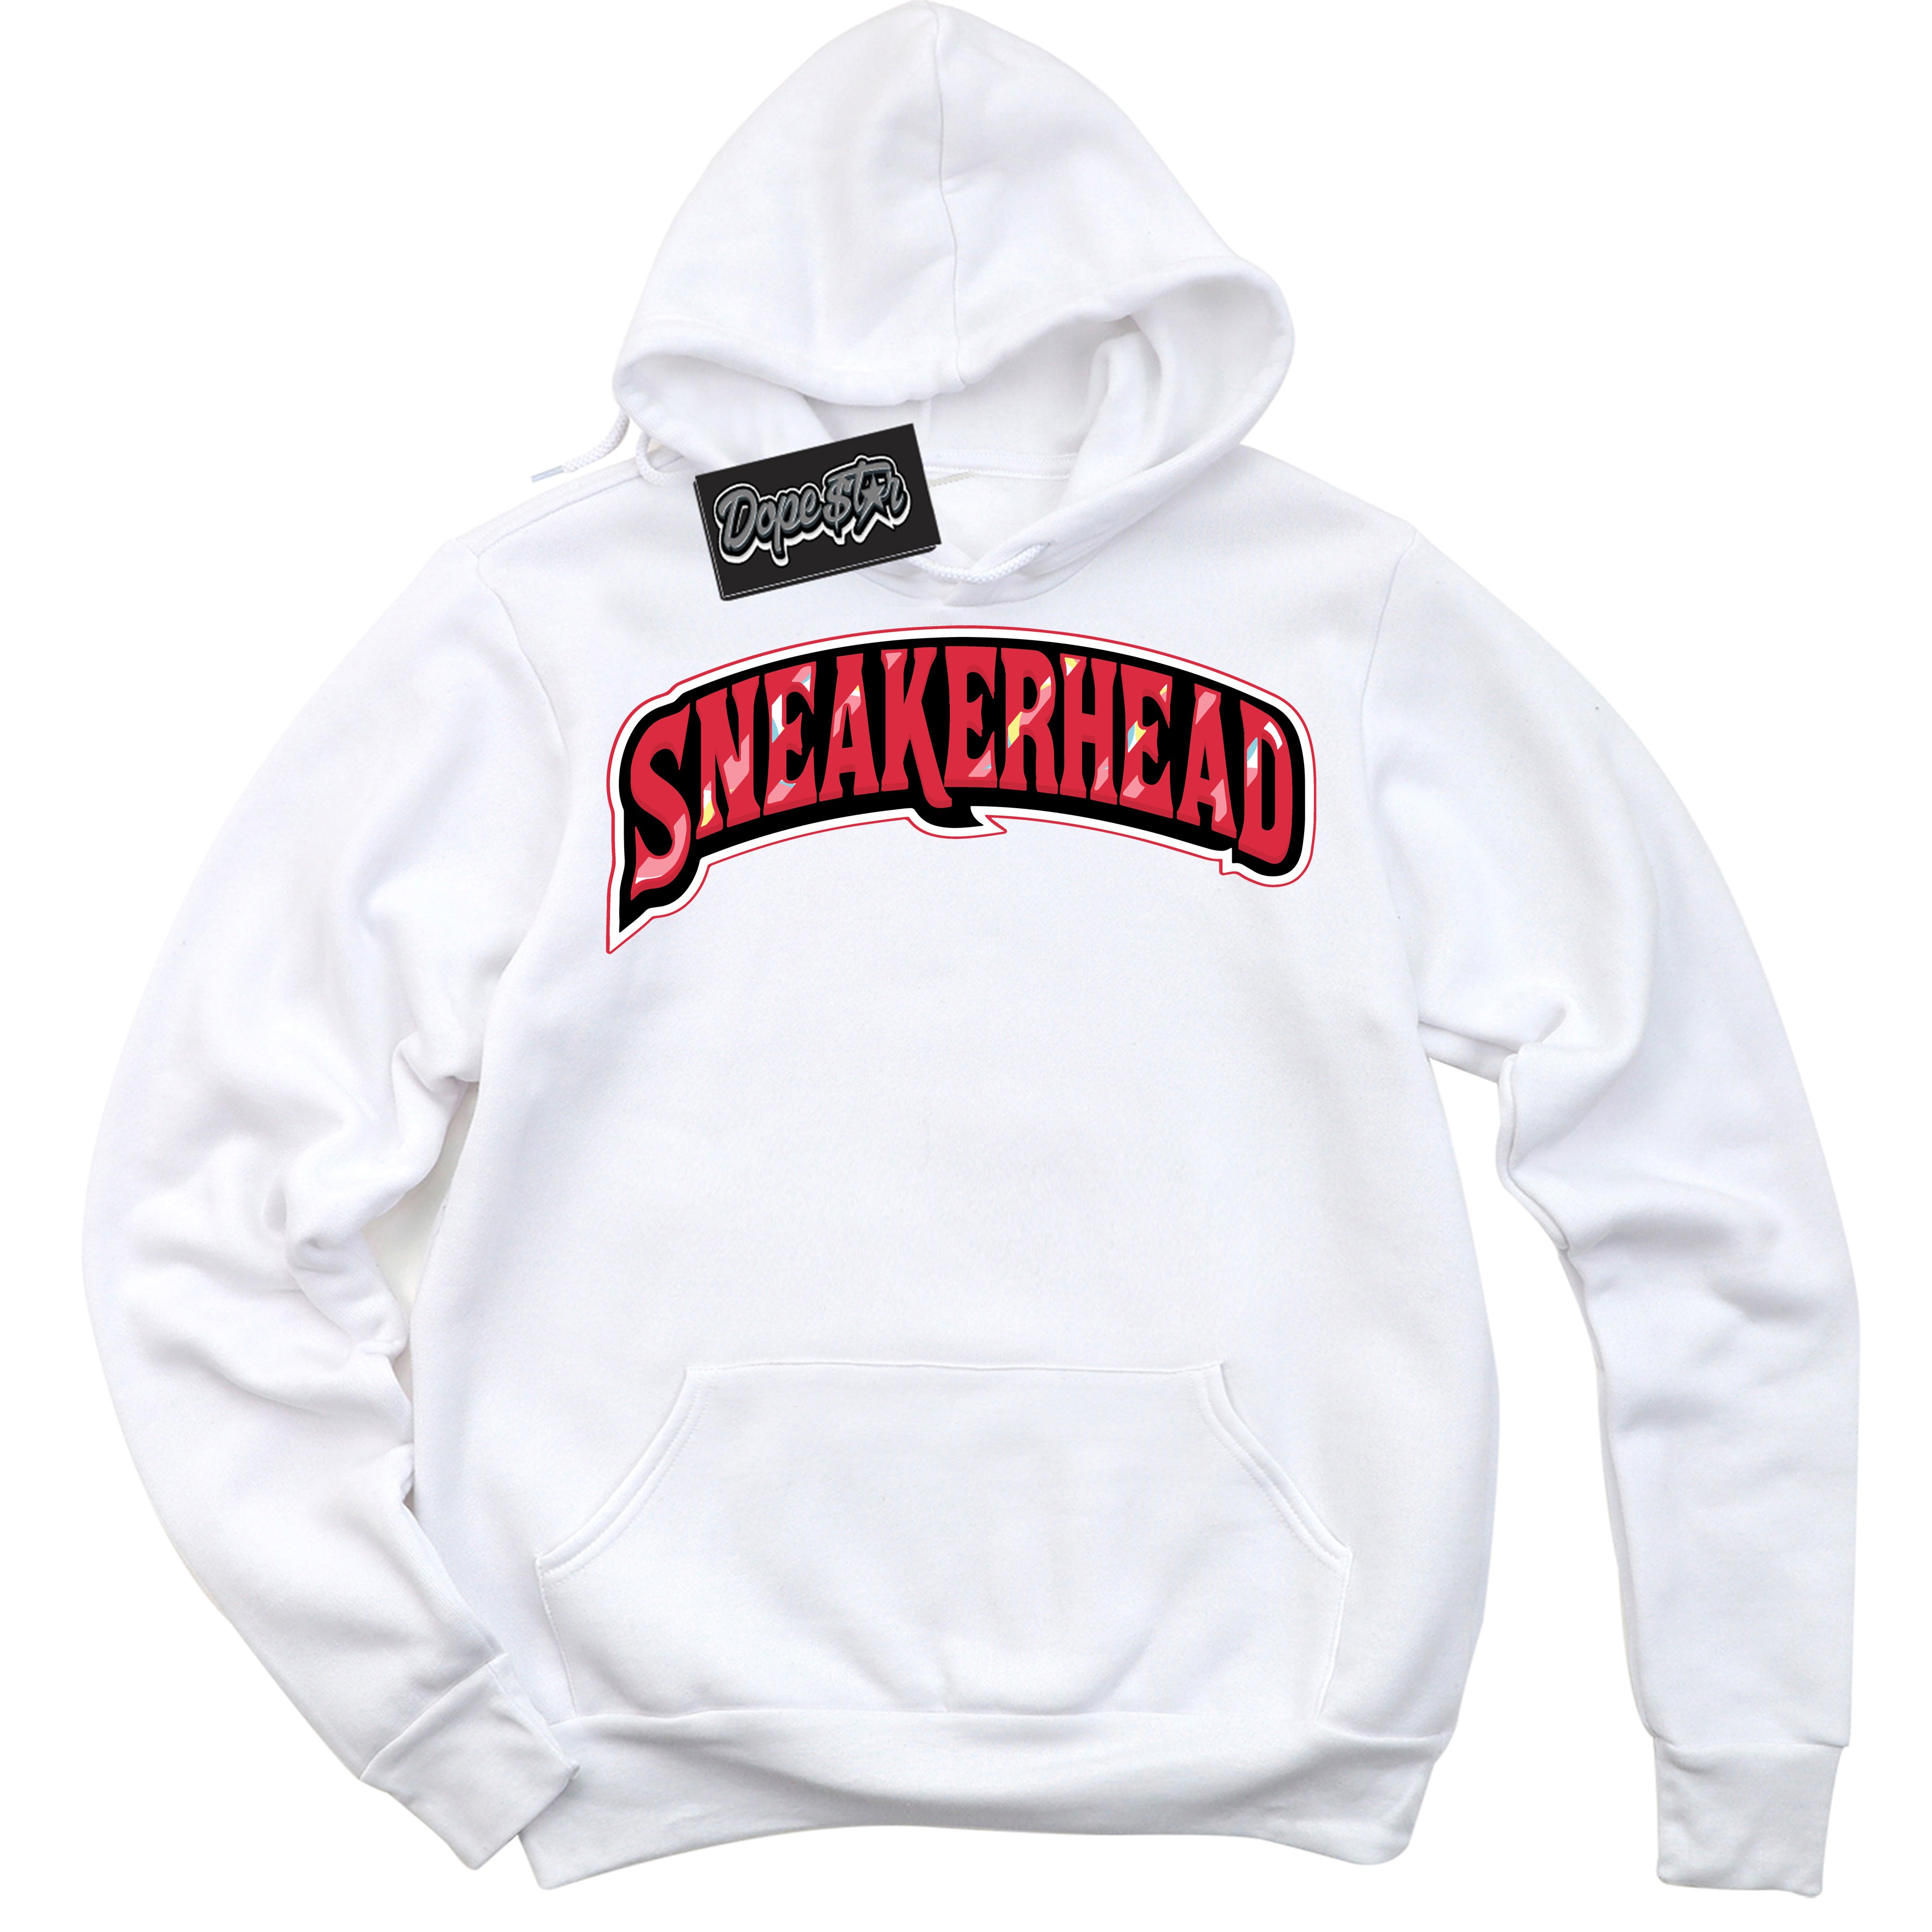 Cool White Graphic DopeStar Hoodie with “ Sneakerhead “ print, that perfectly matches Spider-Verse 1s sneakers